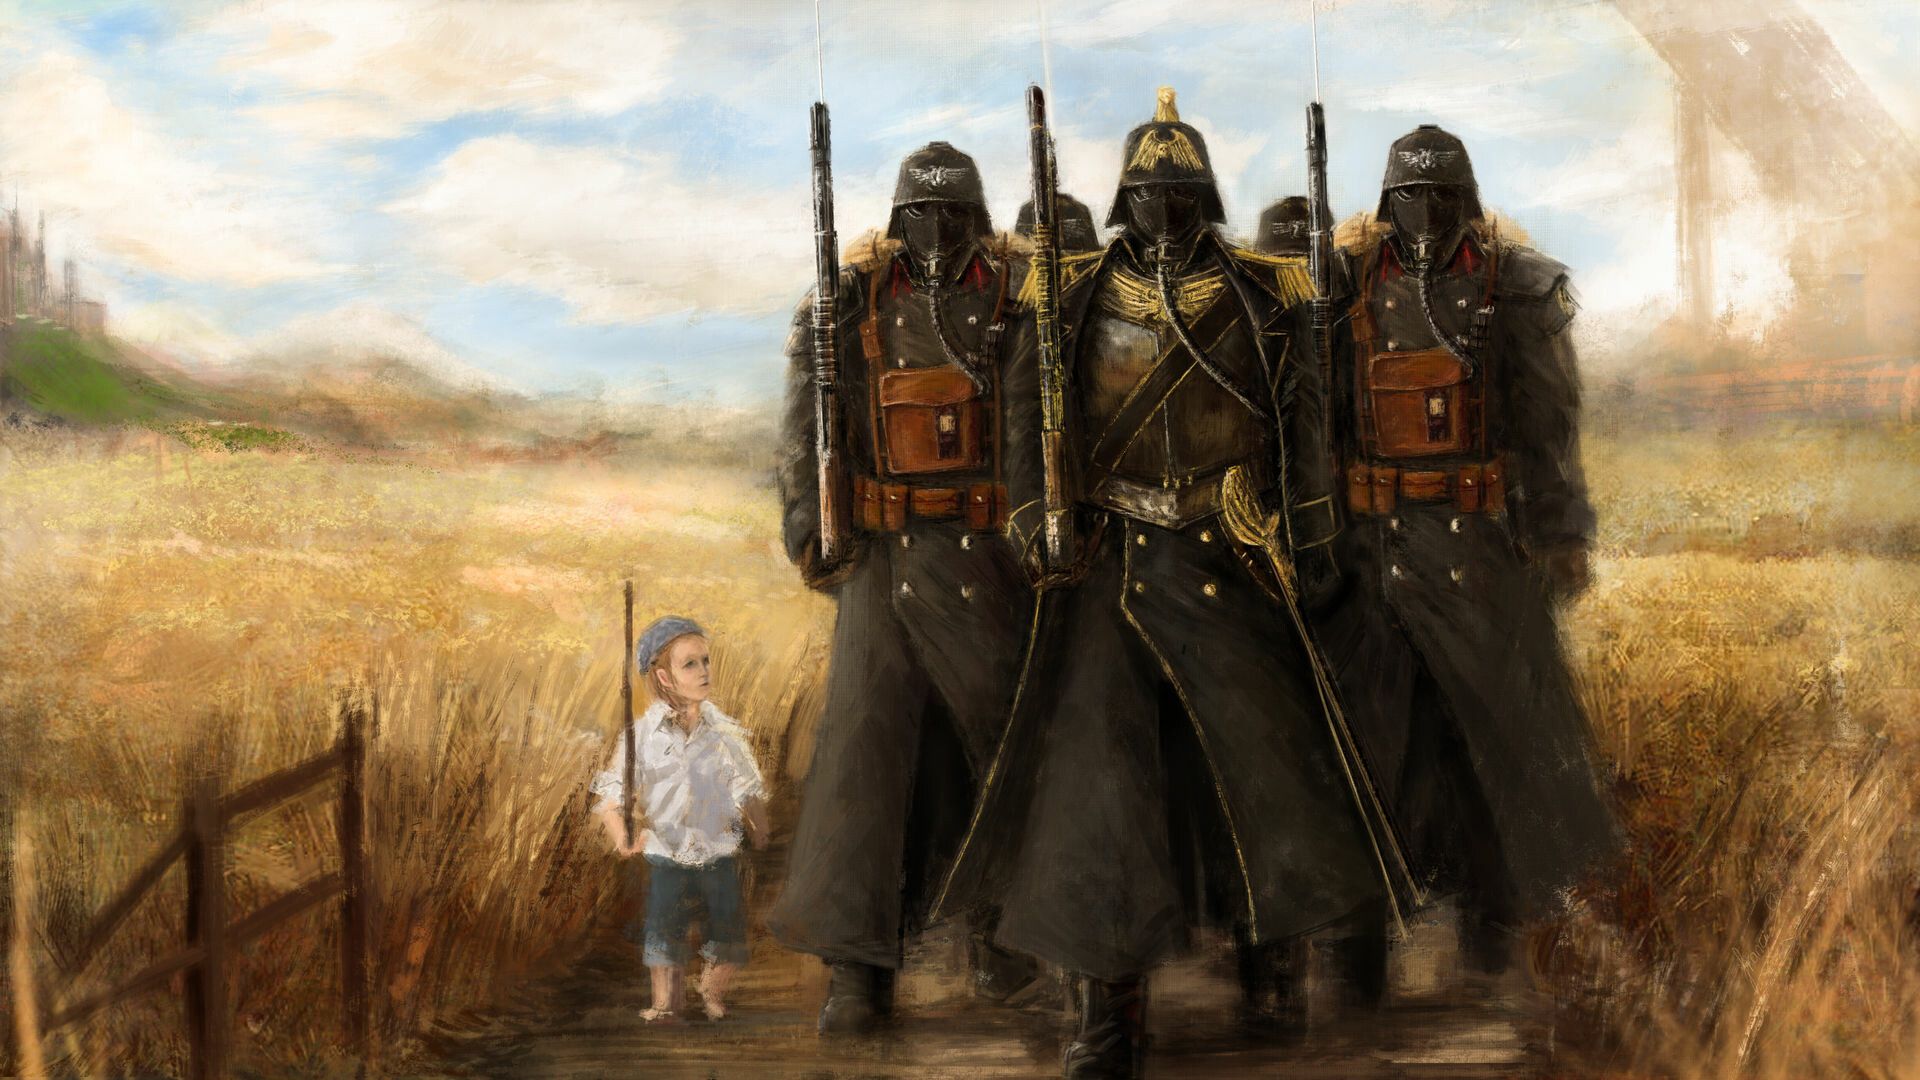 The Death Korps of Krieg in a sort of lord of the rings style painting 1920x1080 resolution wallpaper quality photo